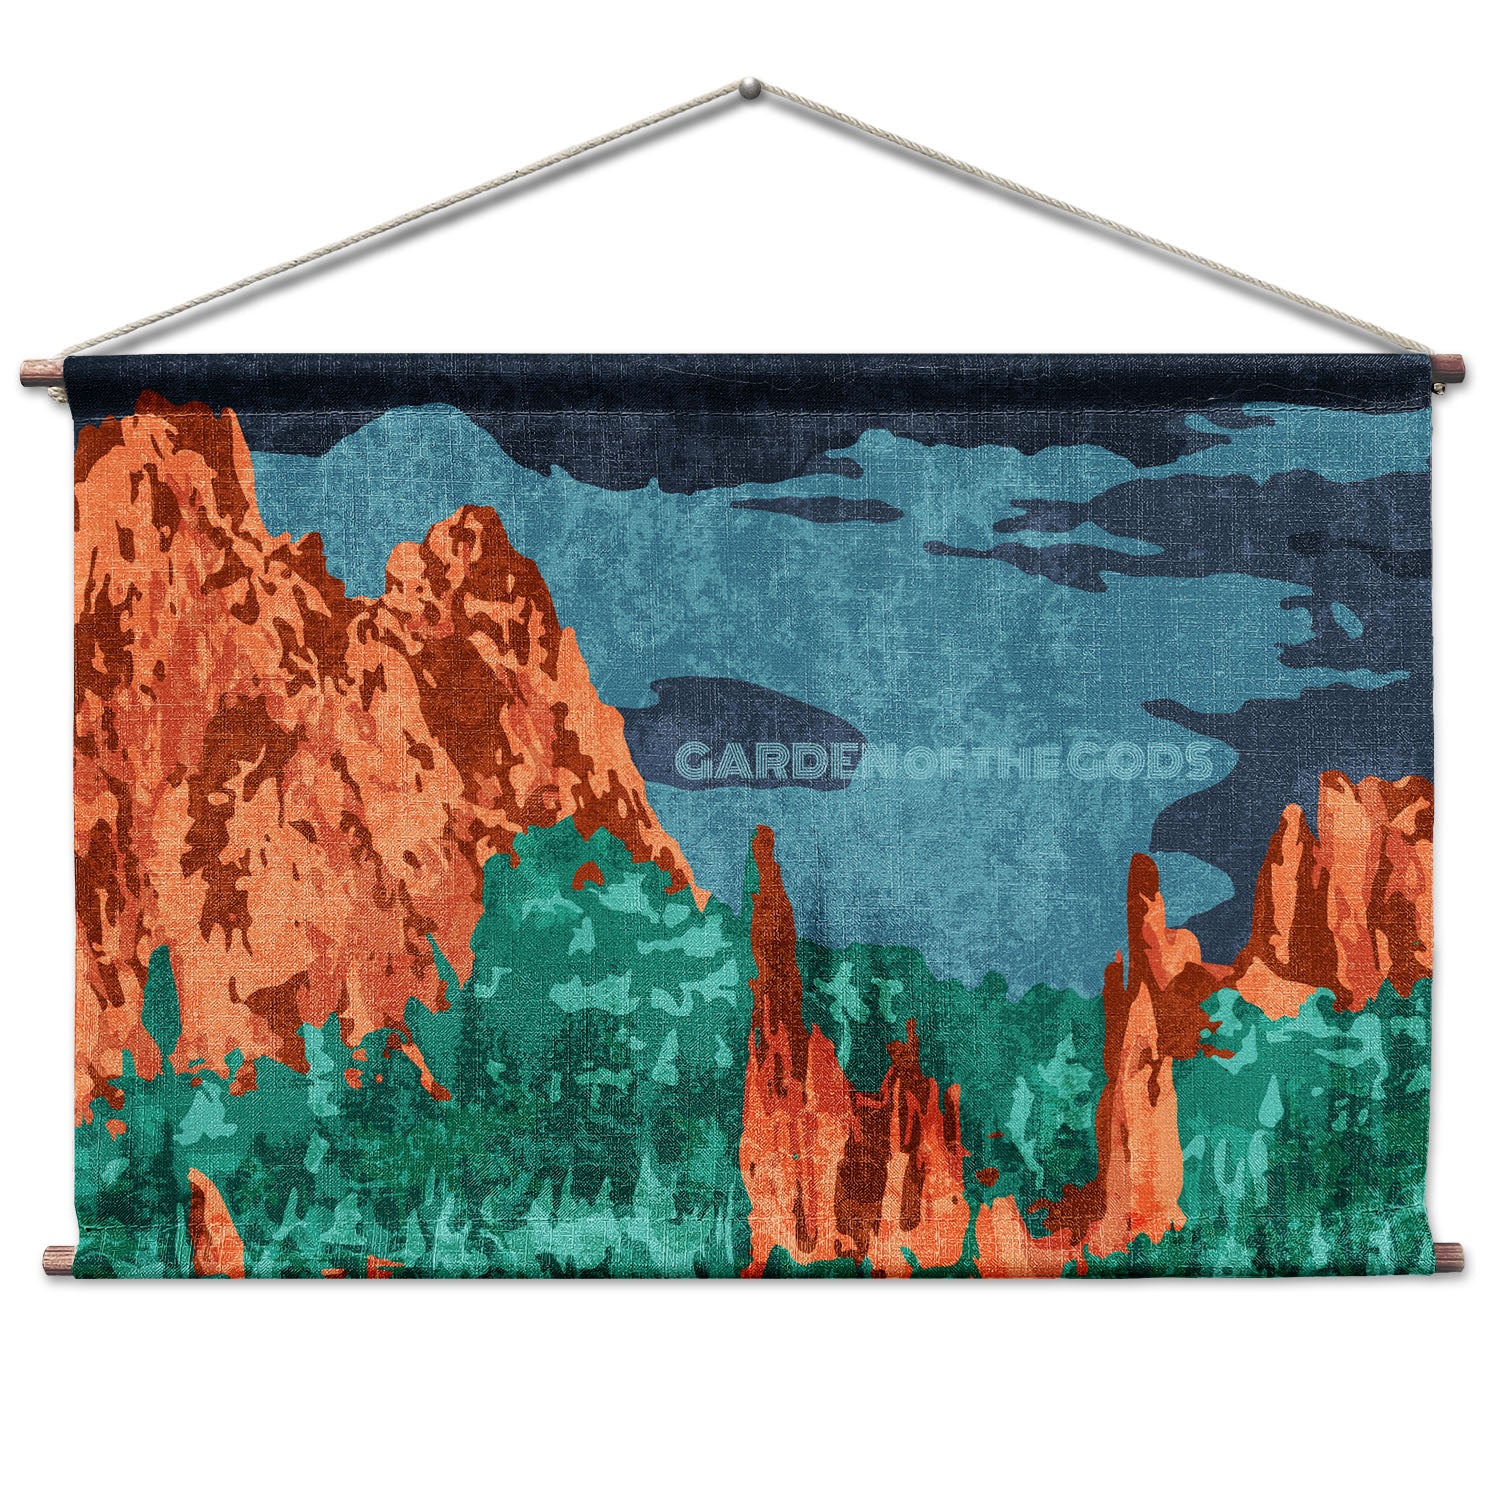 Garden of the Gods Abstract Landscape Wall Hanging - Walnut -  - Knotty Tie Co.